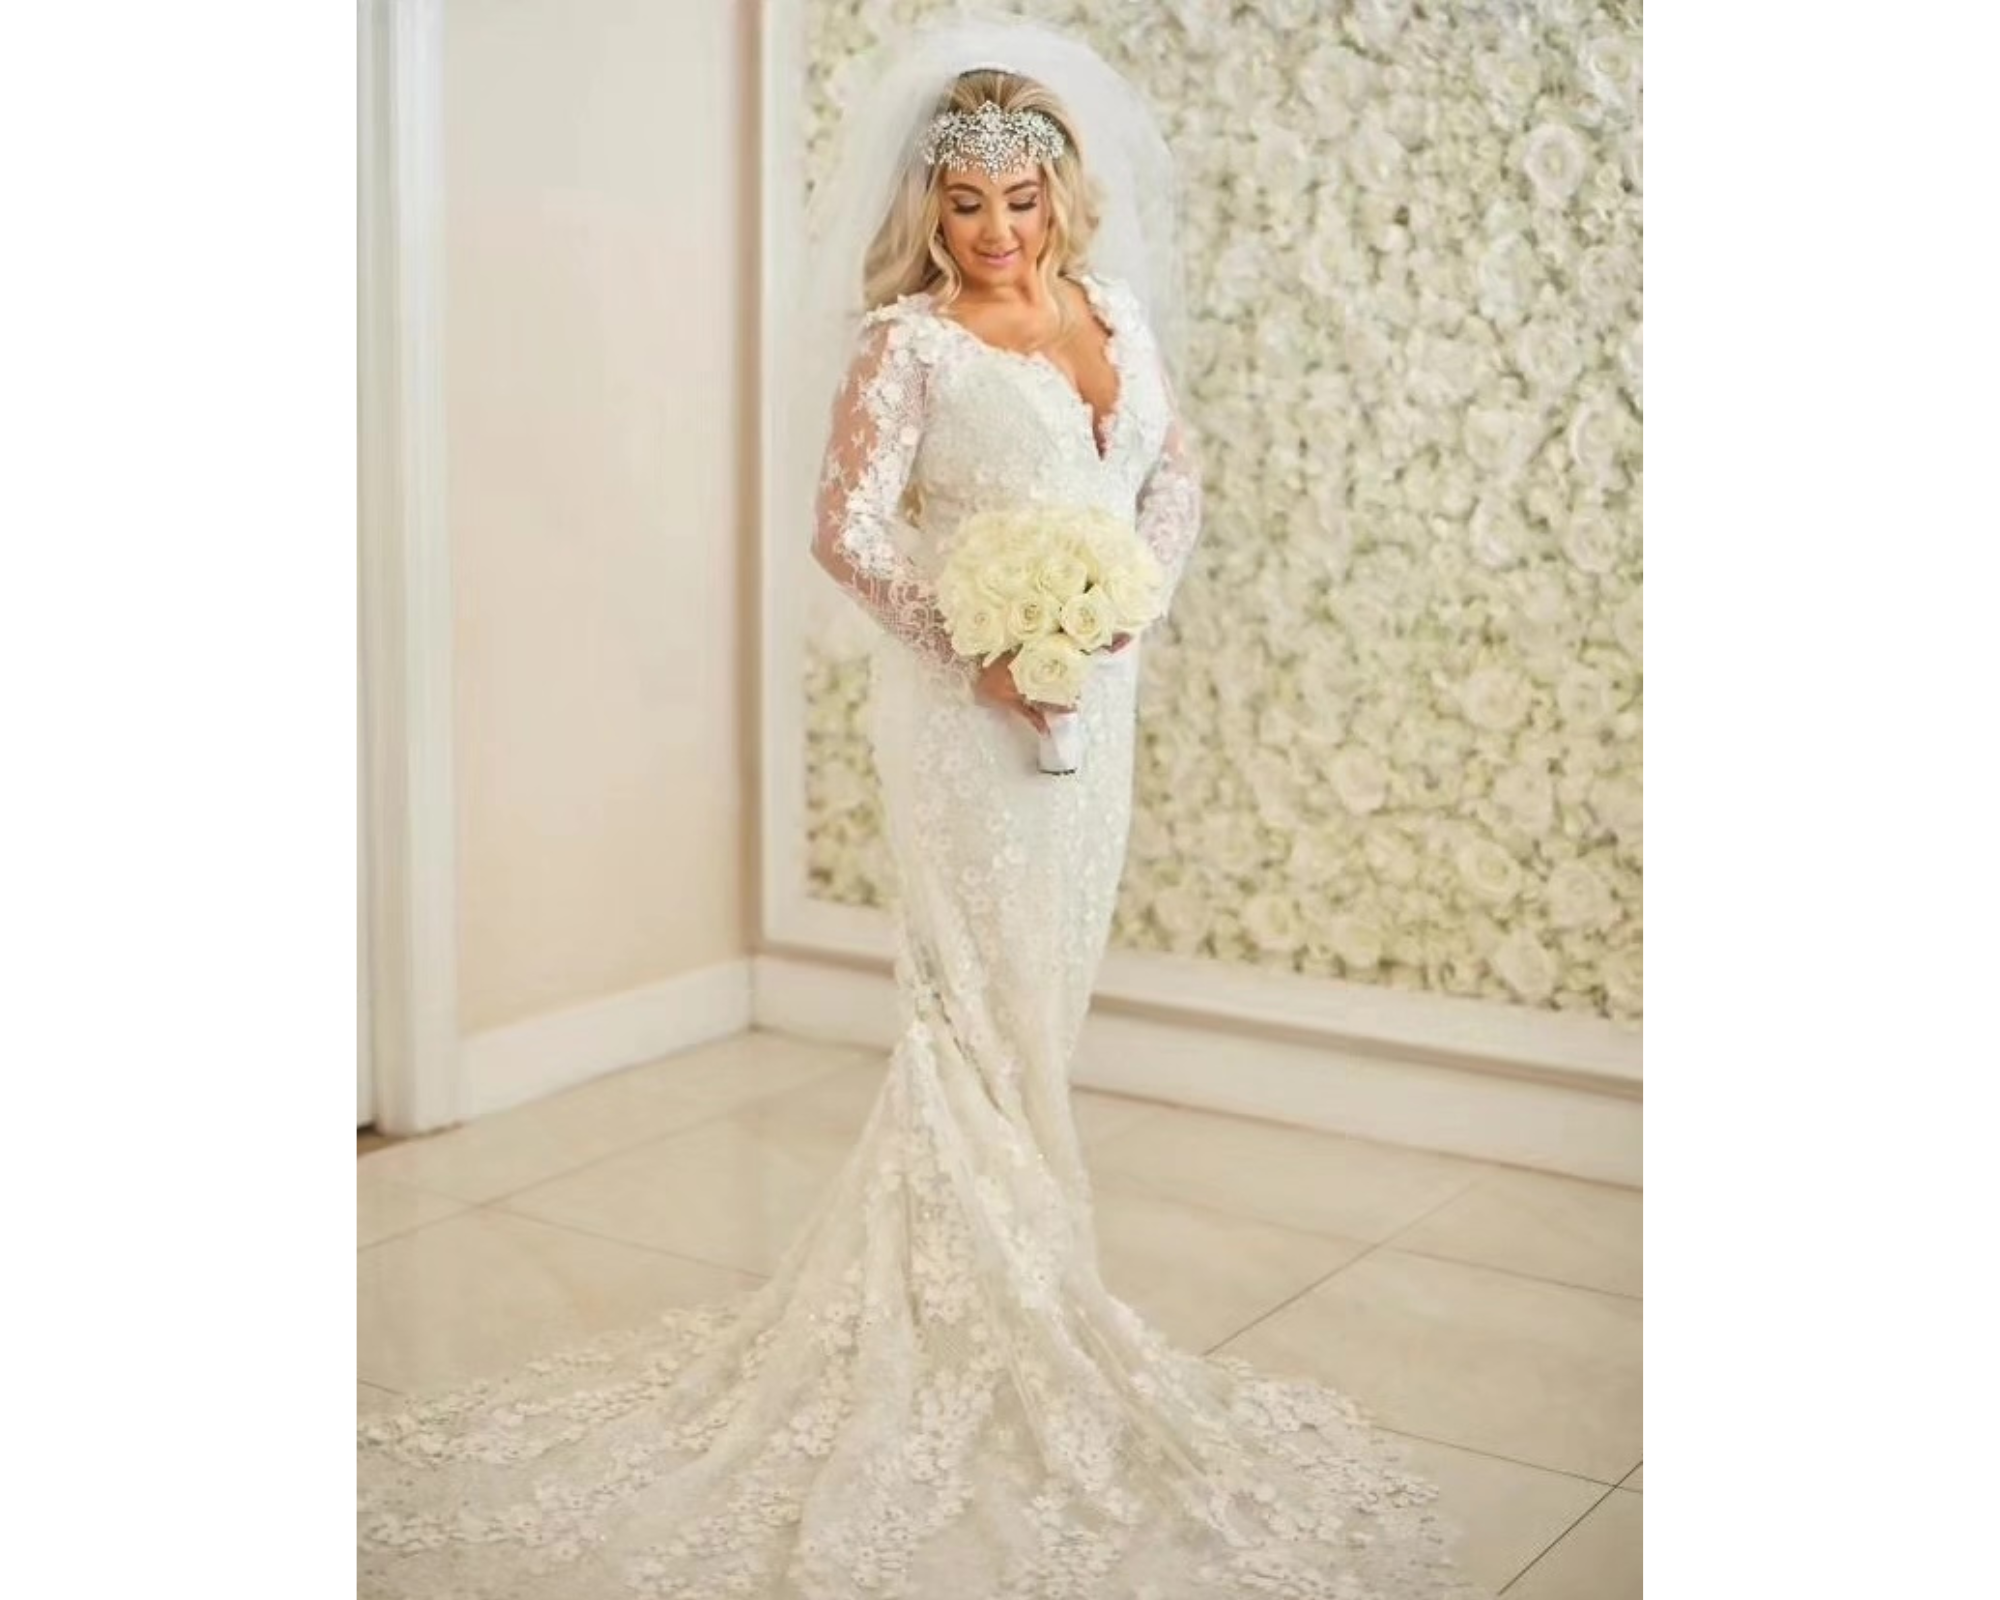 A beautiful blond bride holding her bouquet. She’s wearing a lace wedding dress and crystal bridal headpiece.